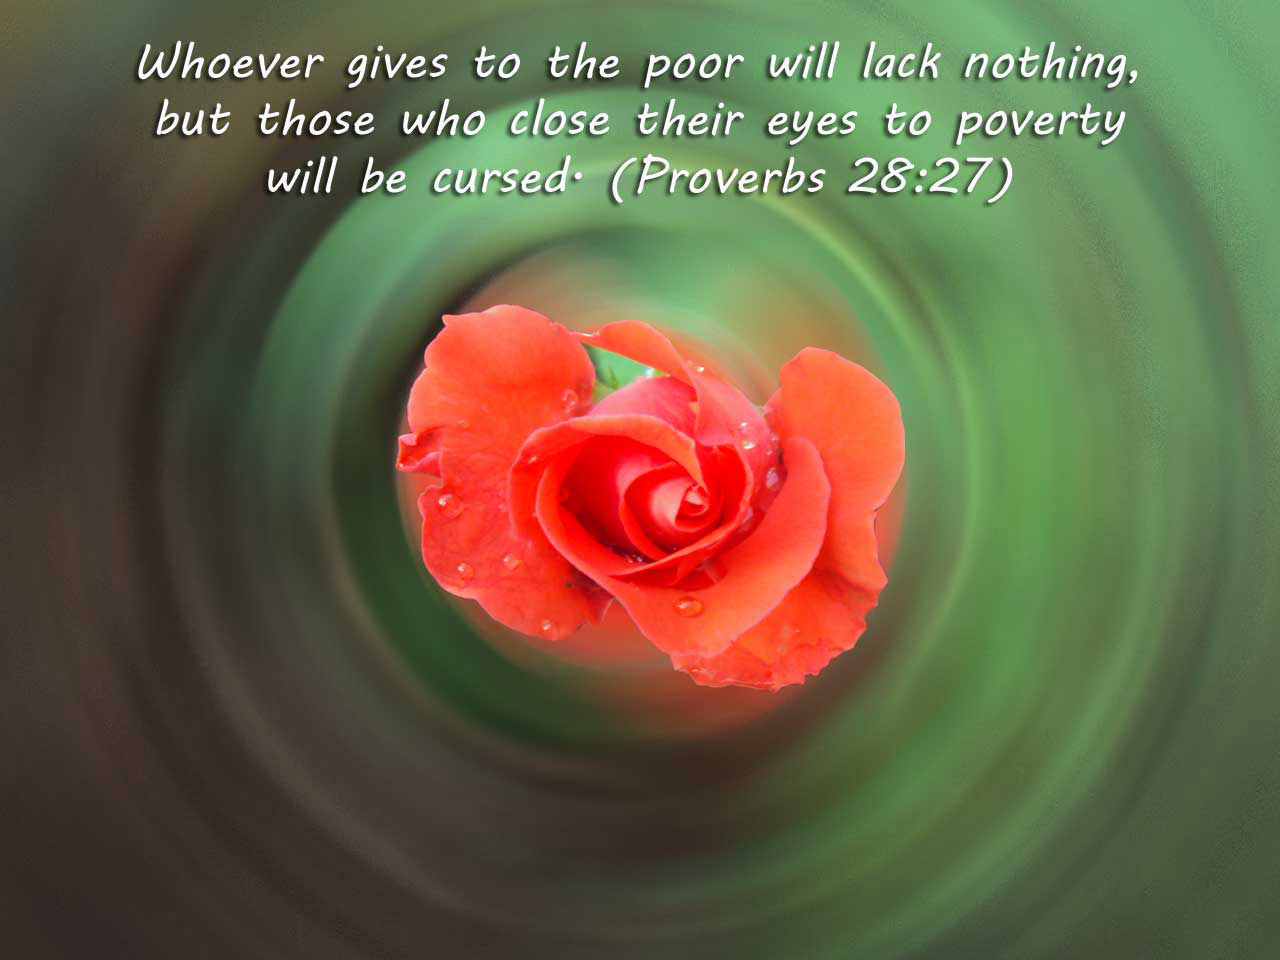 wallpapers christian proverbs free photo